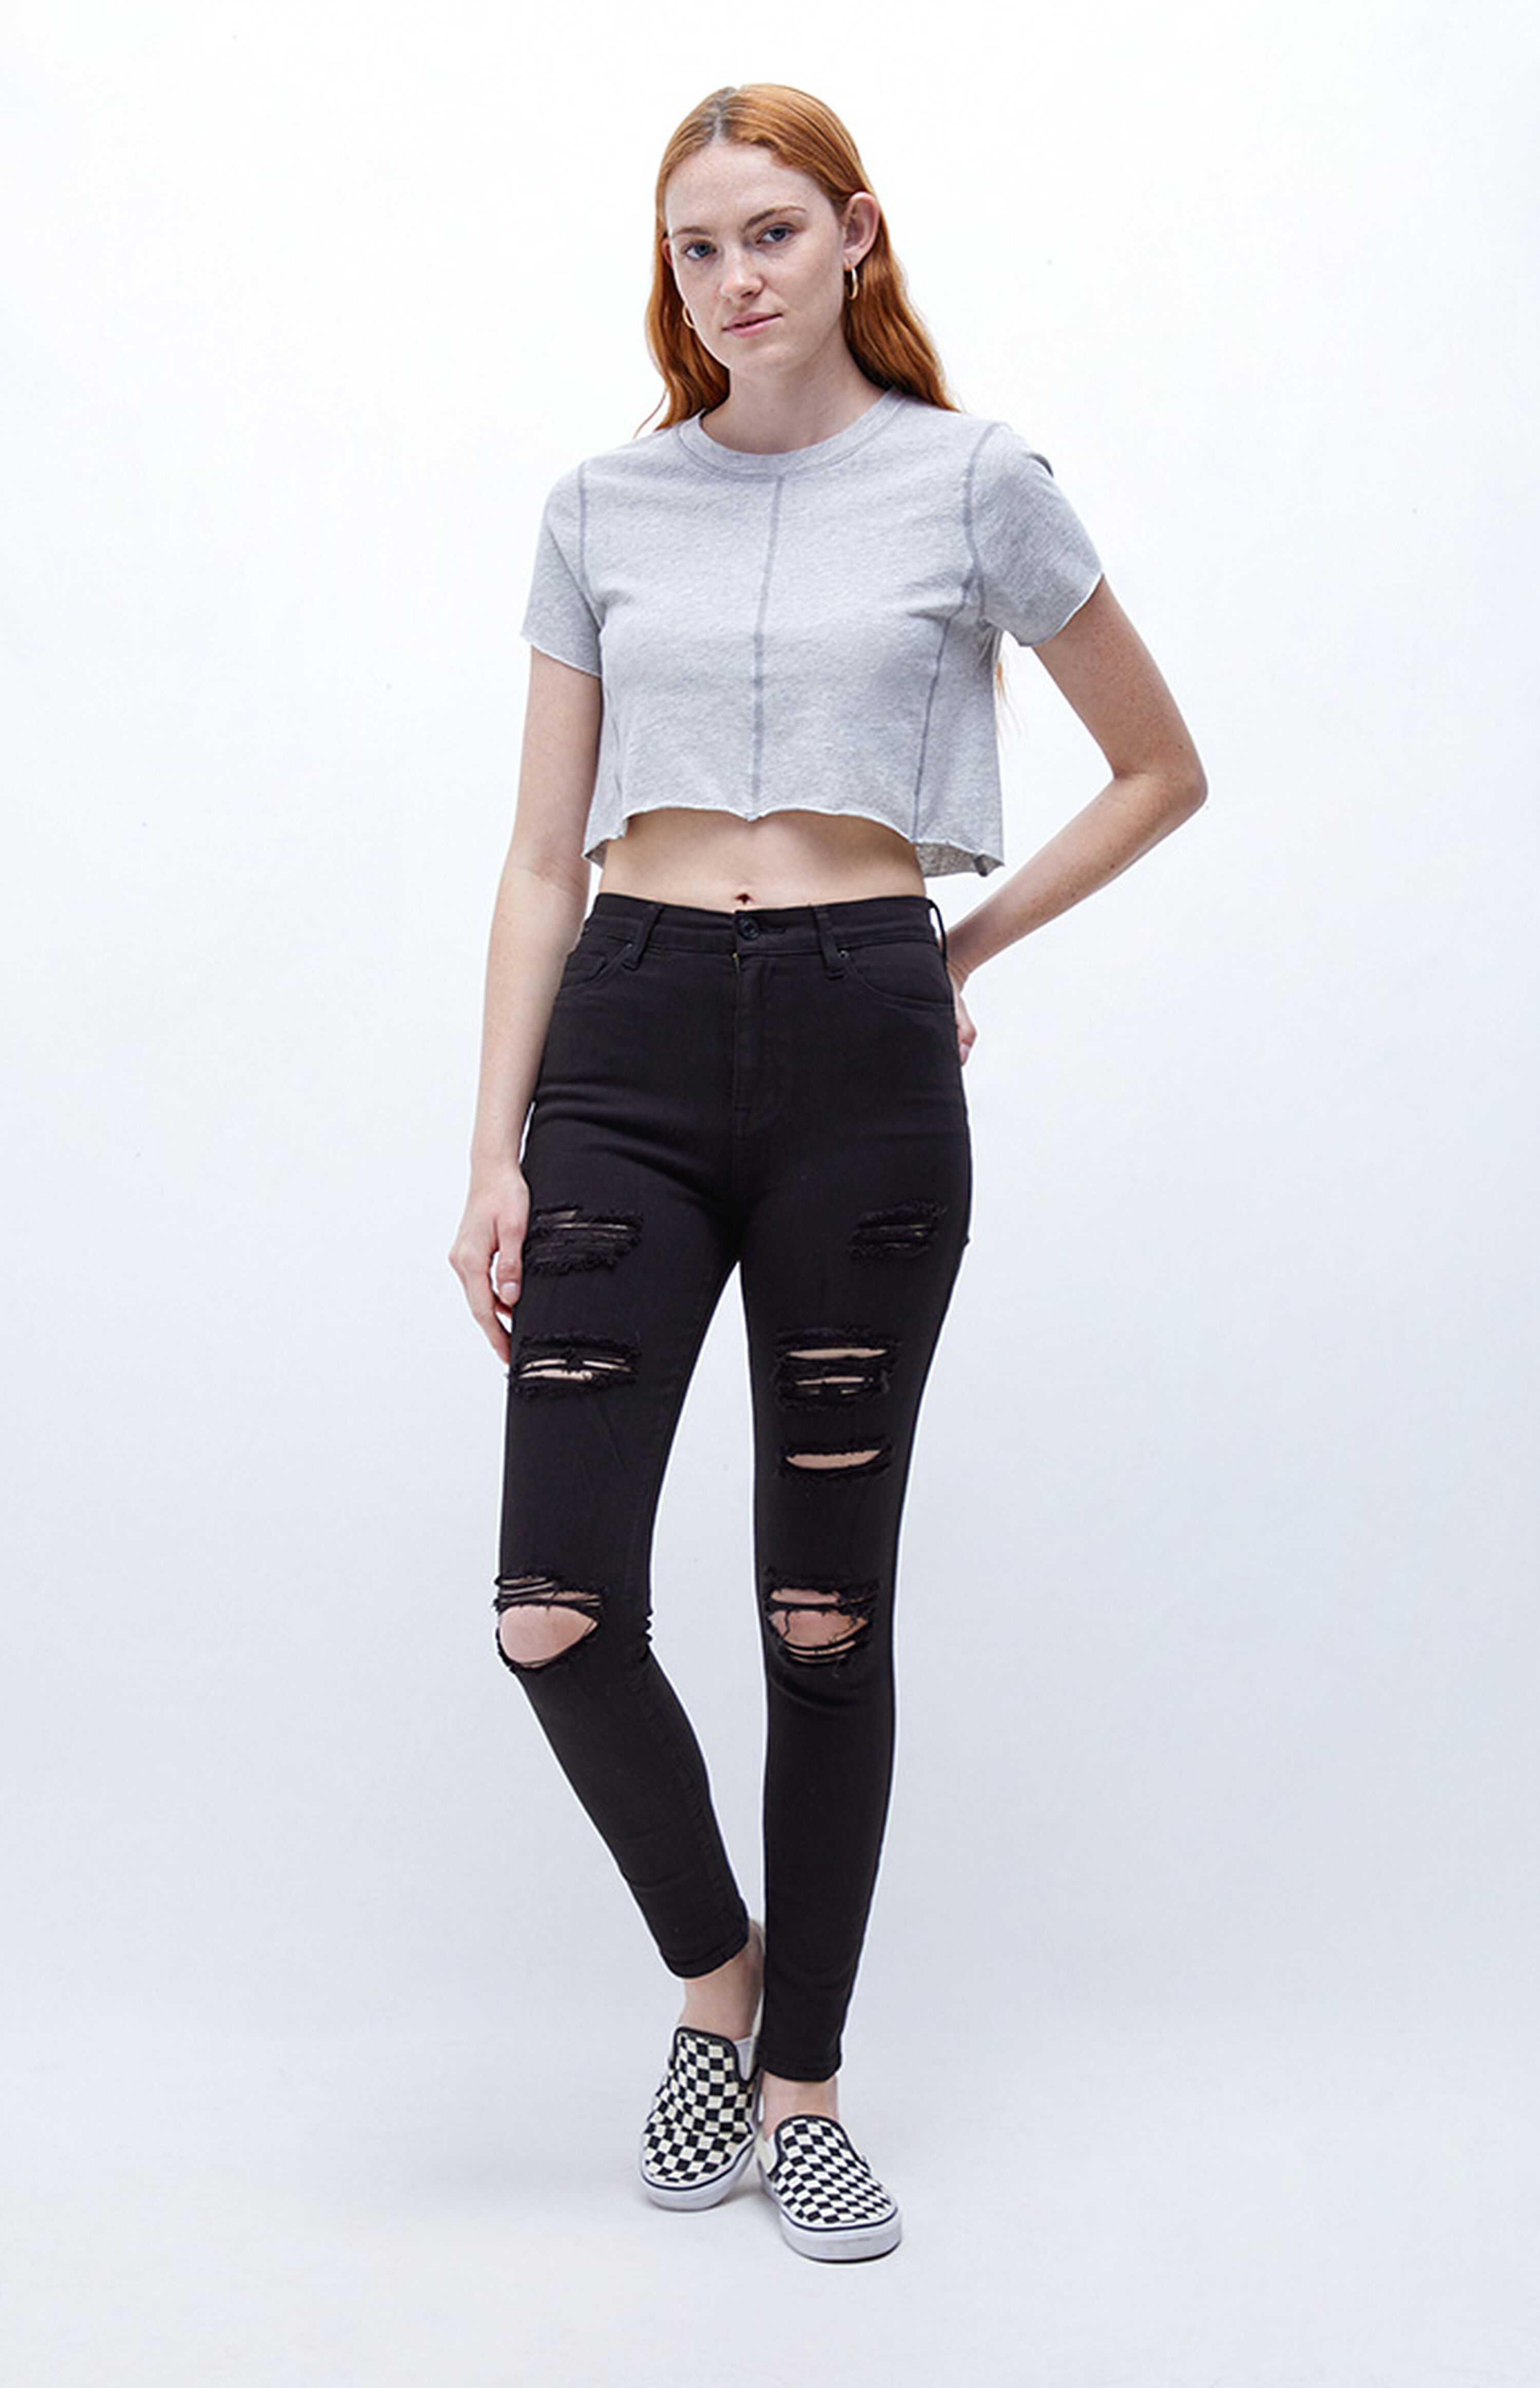 PacSun Black Ripped High Waisted Jeggings | PacSun